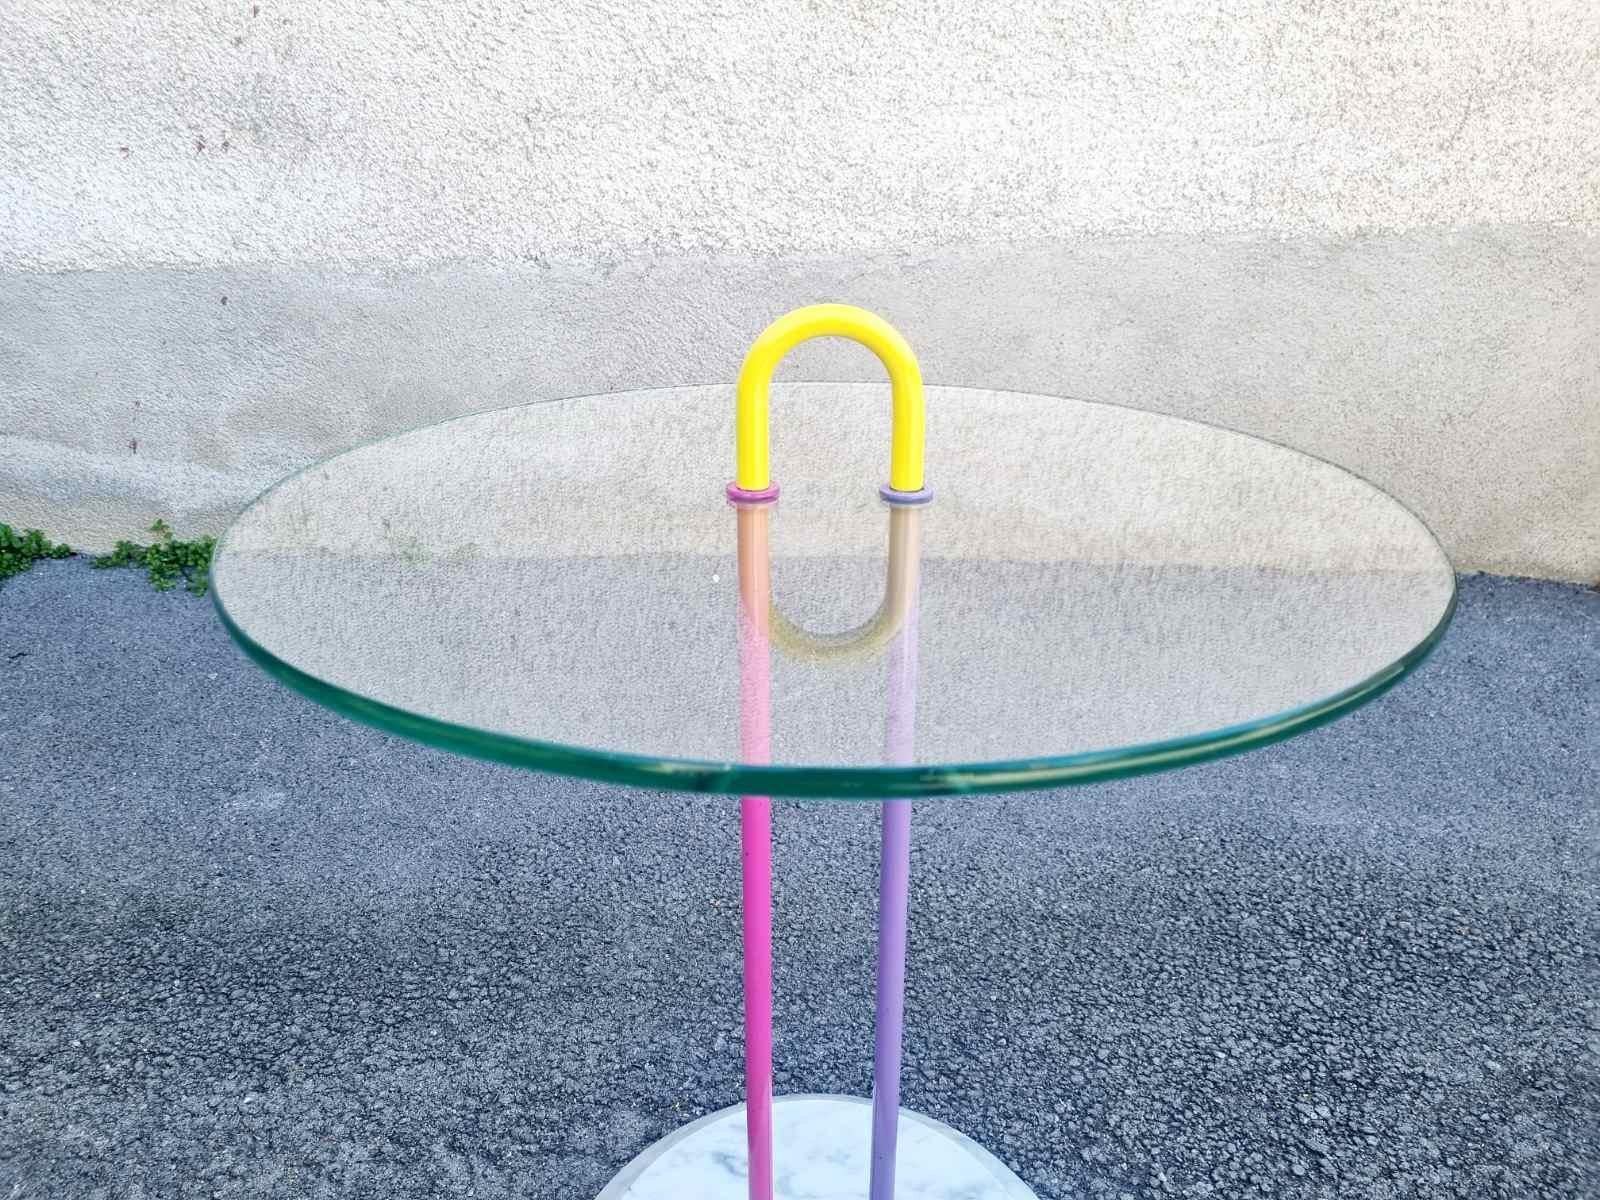 Rare side table designed by Vico Magistretti for Cattelan Italia-
Made from marble, glass and metal
Designed in Memphis style in the 80s
Perfect original conditions